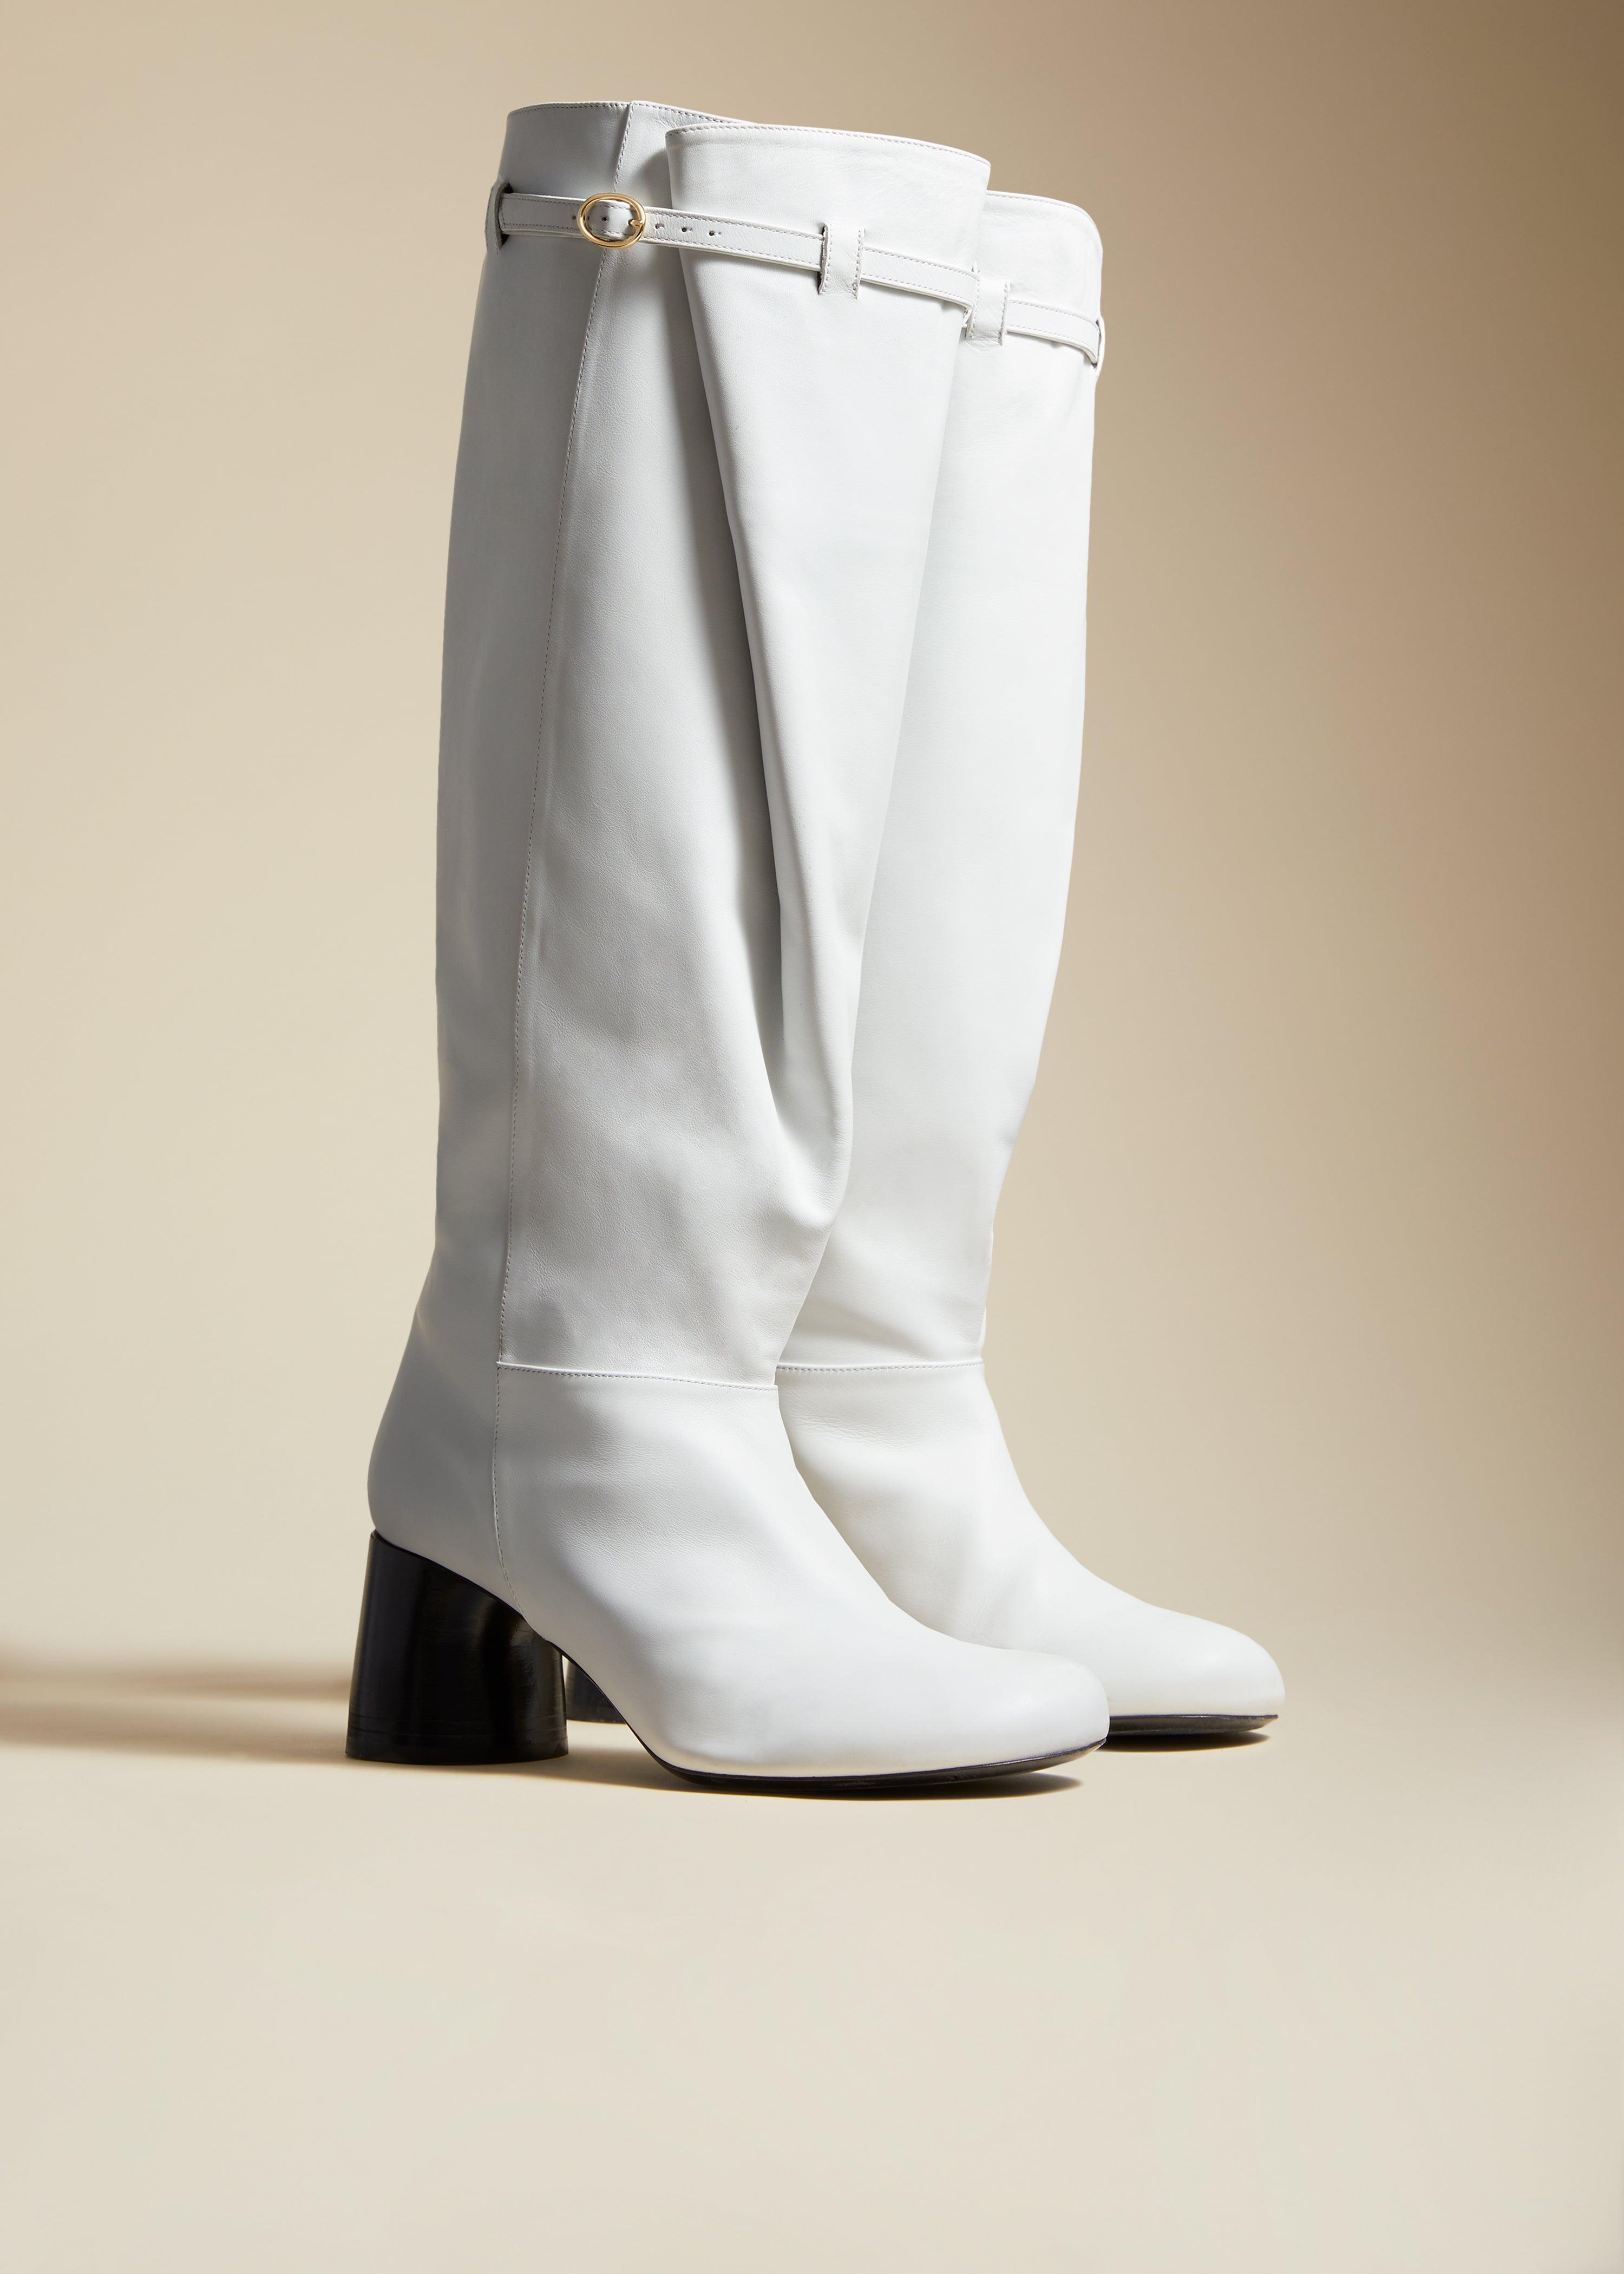 The Admiral Knee-High Boot in White Leather - The Iconic Issue